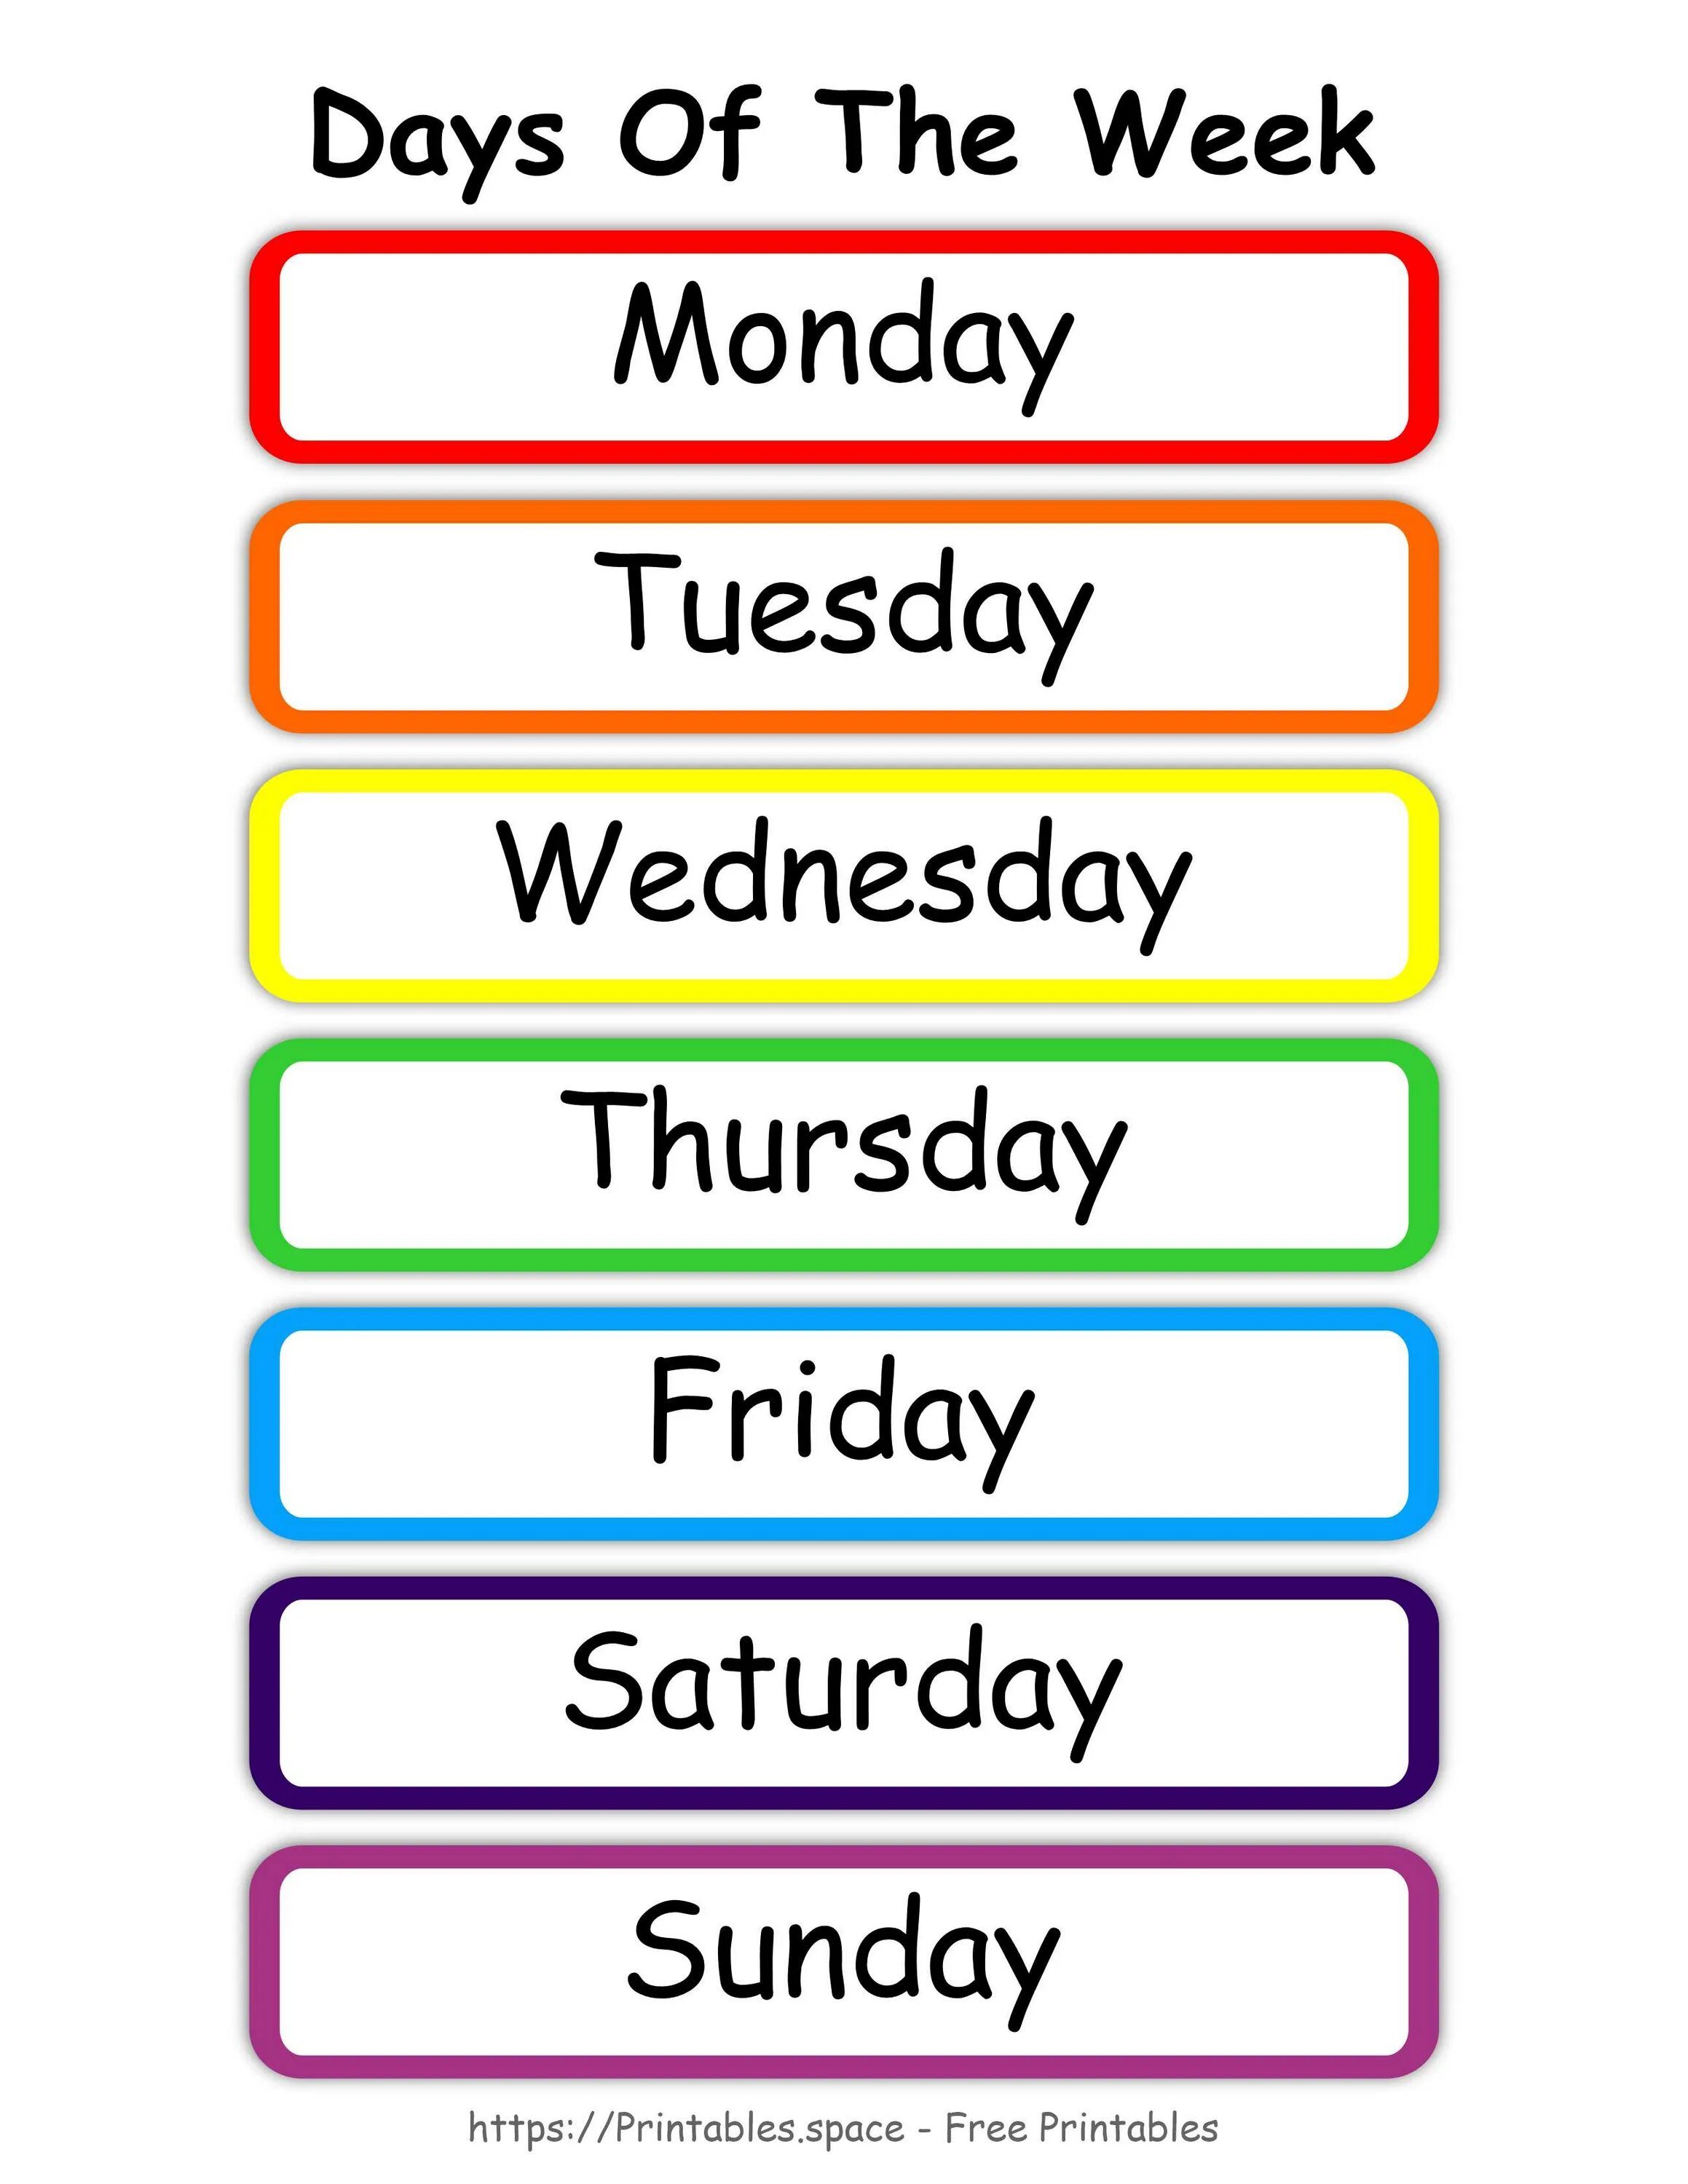 Days of the week. Days of the week плакат. English Days of the week. Days of the week for Kids. Many day текст